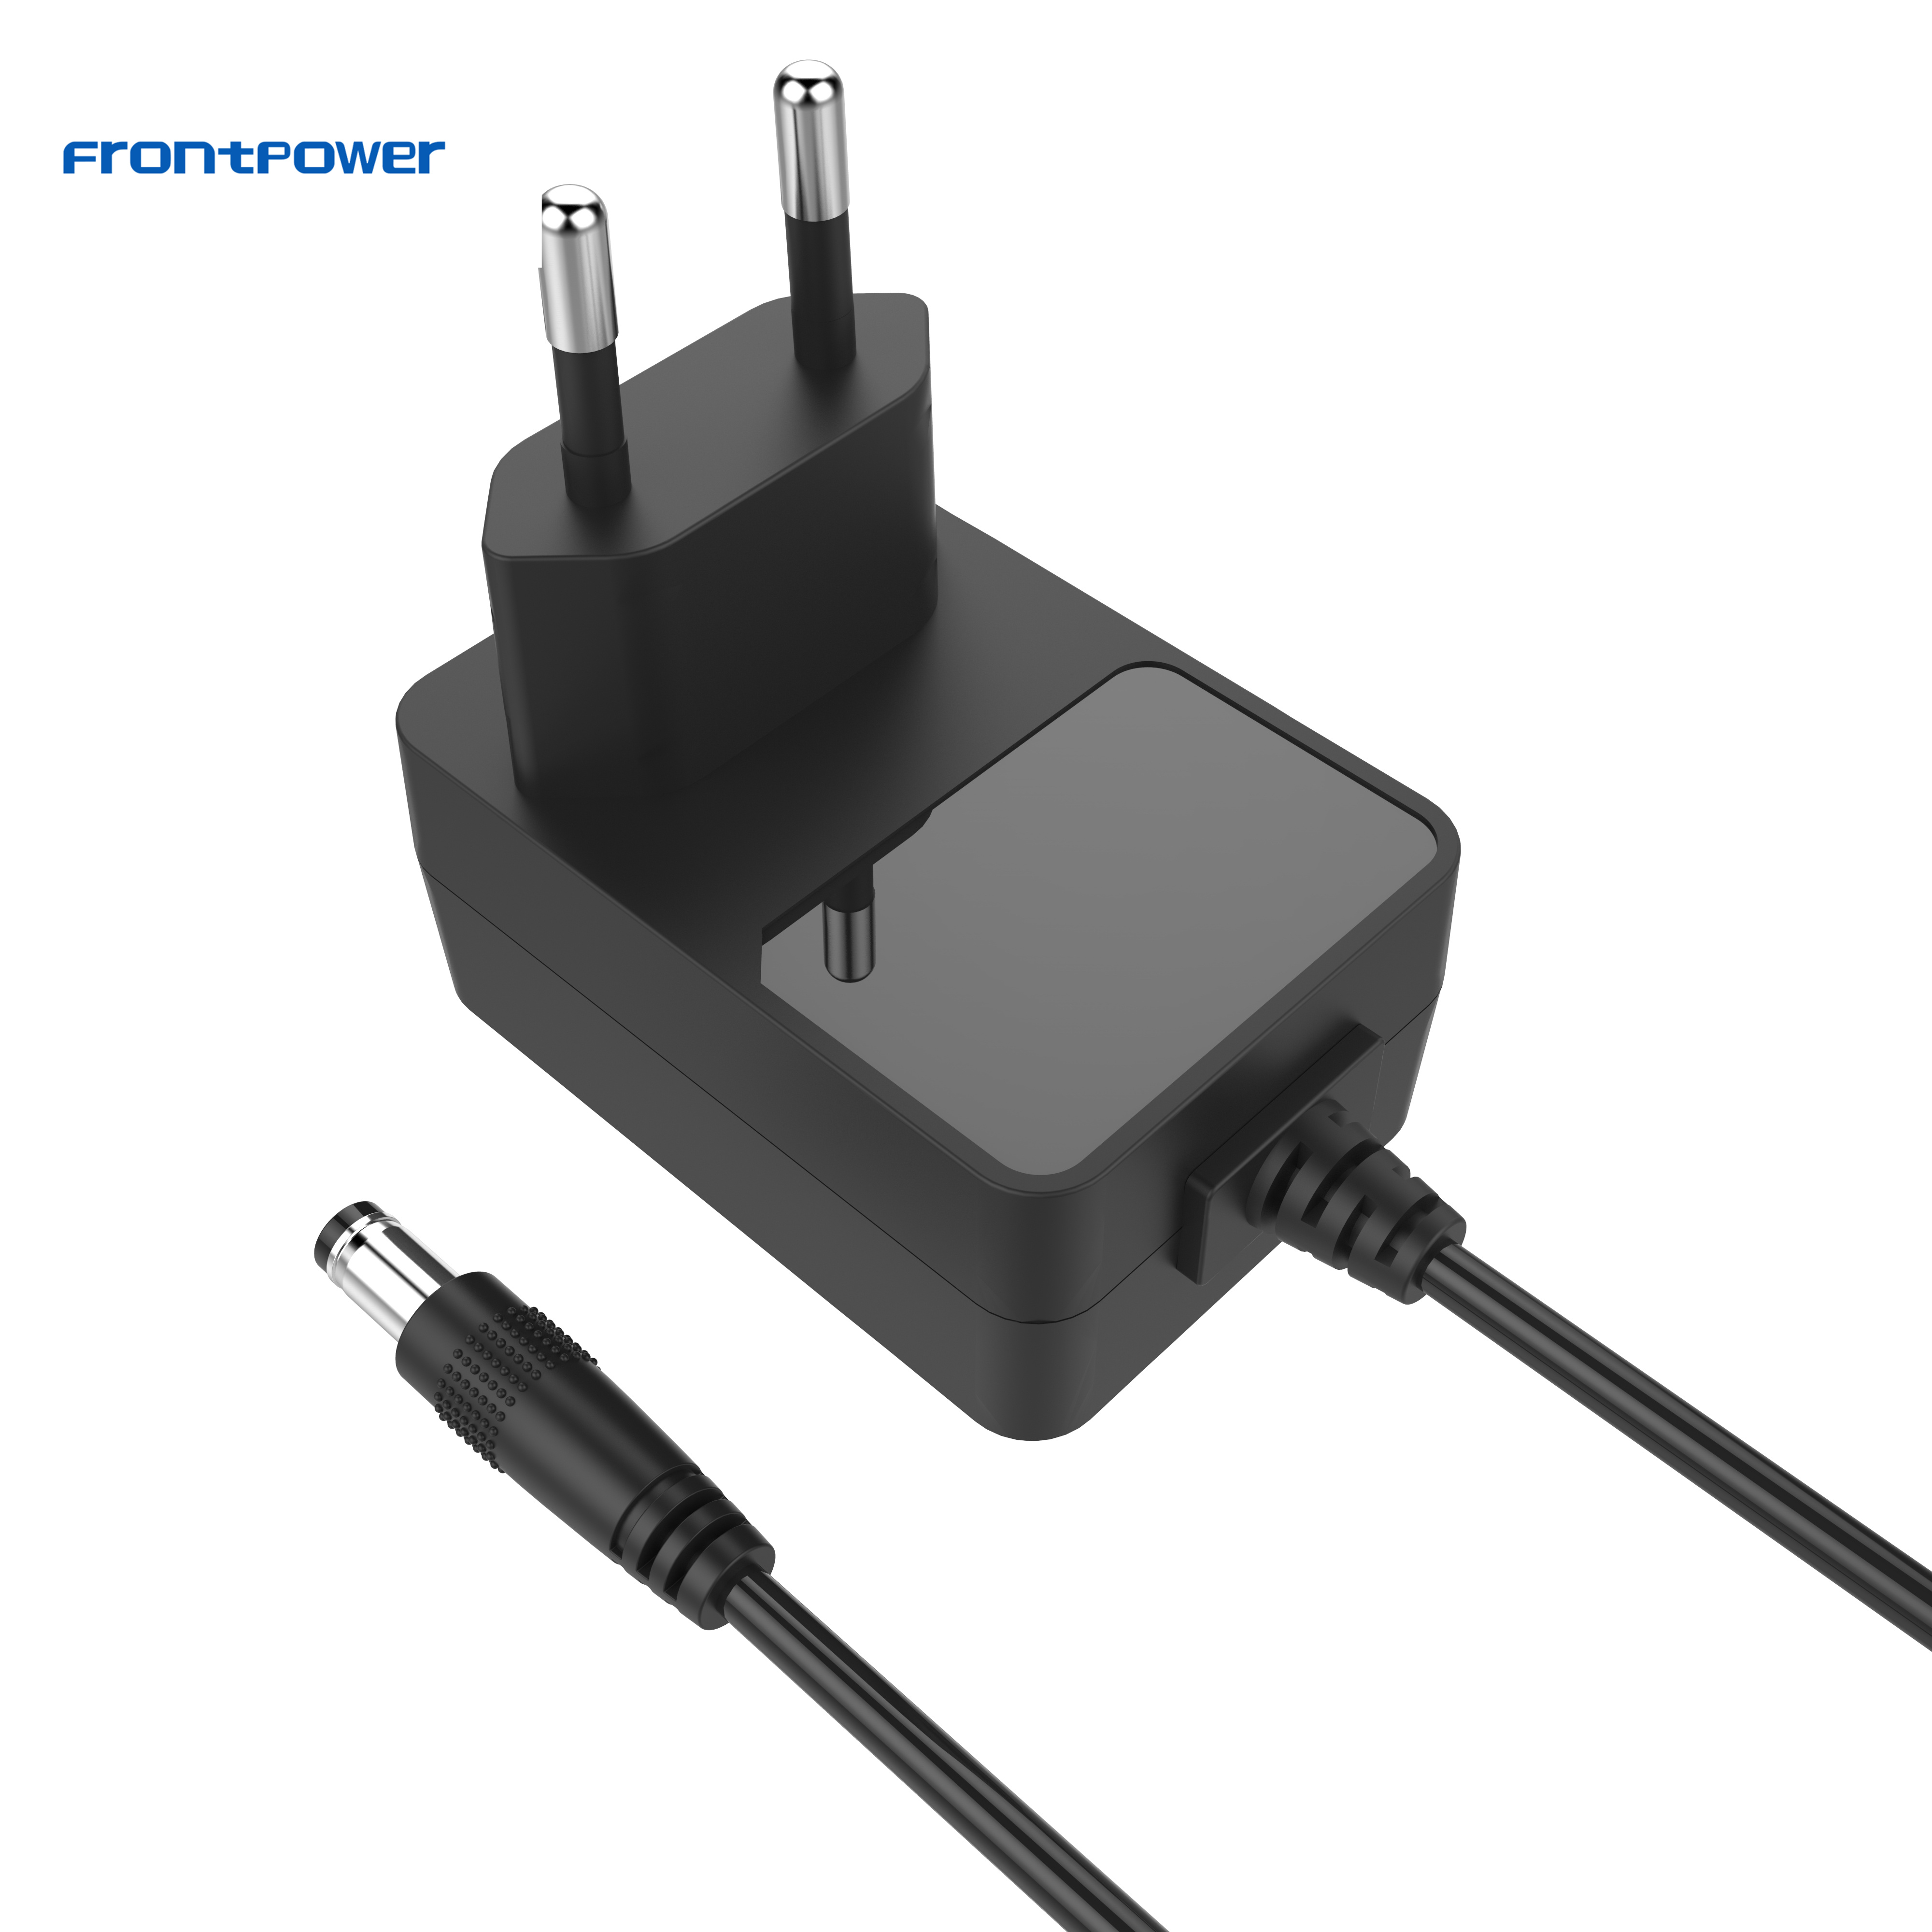 wall amount adapter 6v 2a black or white dc power supply with UL CB CE GS EMC SAA KC FCC PSE CCC approved